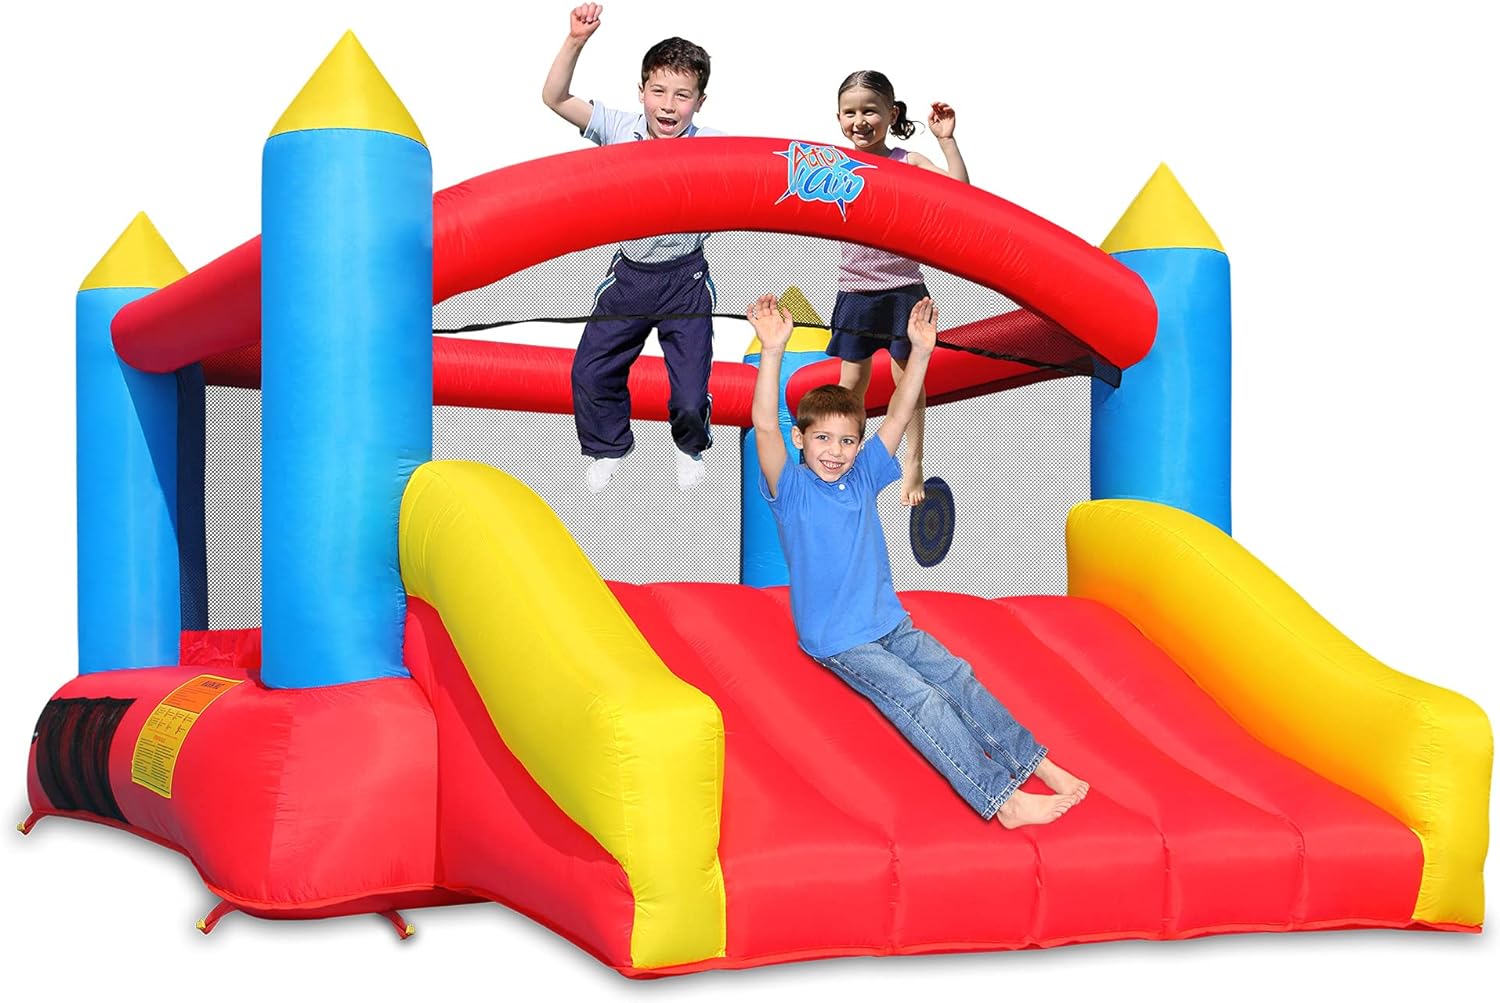 Looking For Family Fun in Zimtown This Fall. Check Out These Top 10 Inflatable Bounce Houses